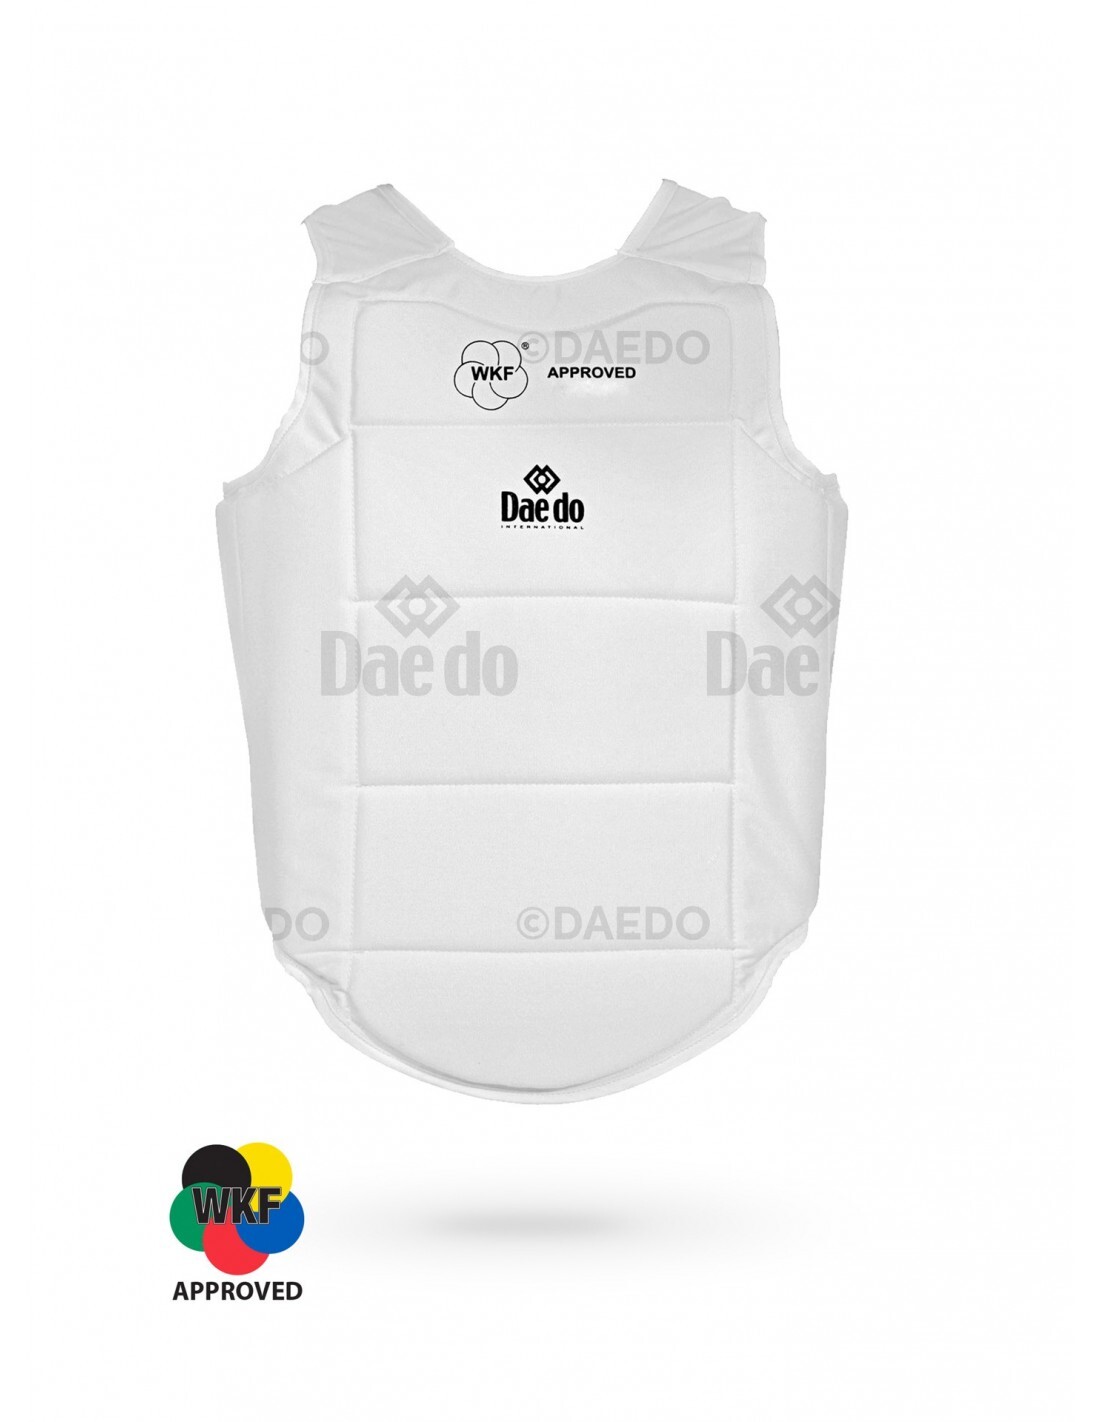 DAEDO - WKF Approved Body Protector - Small